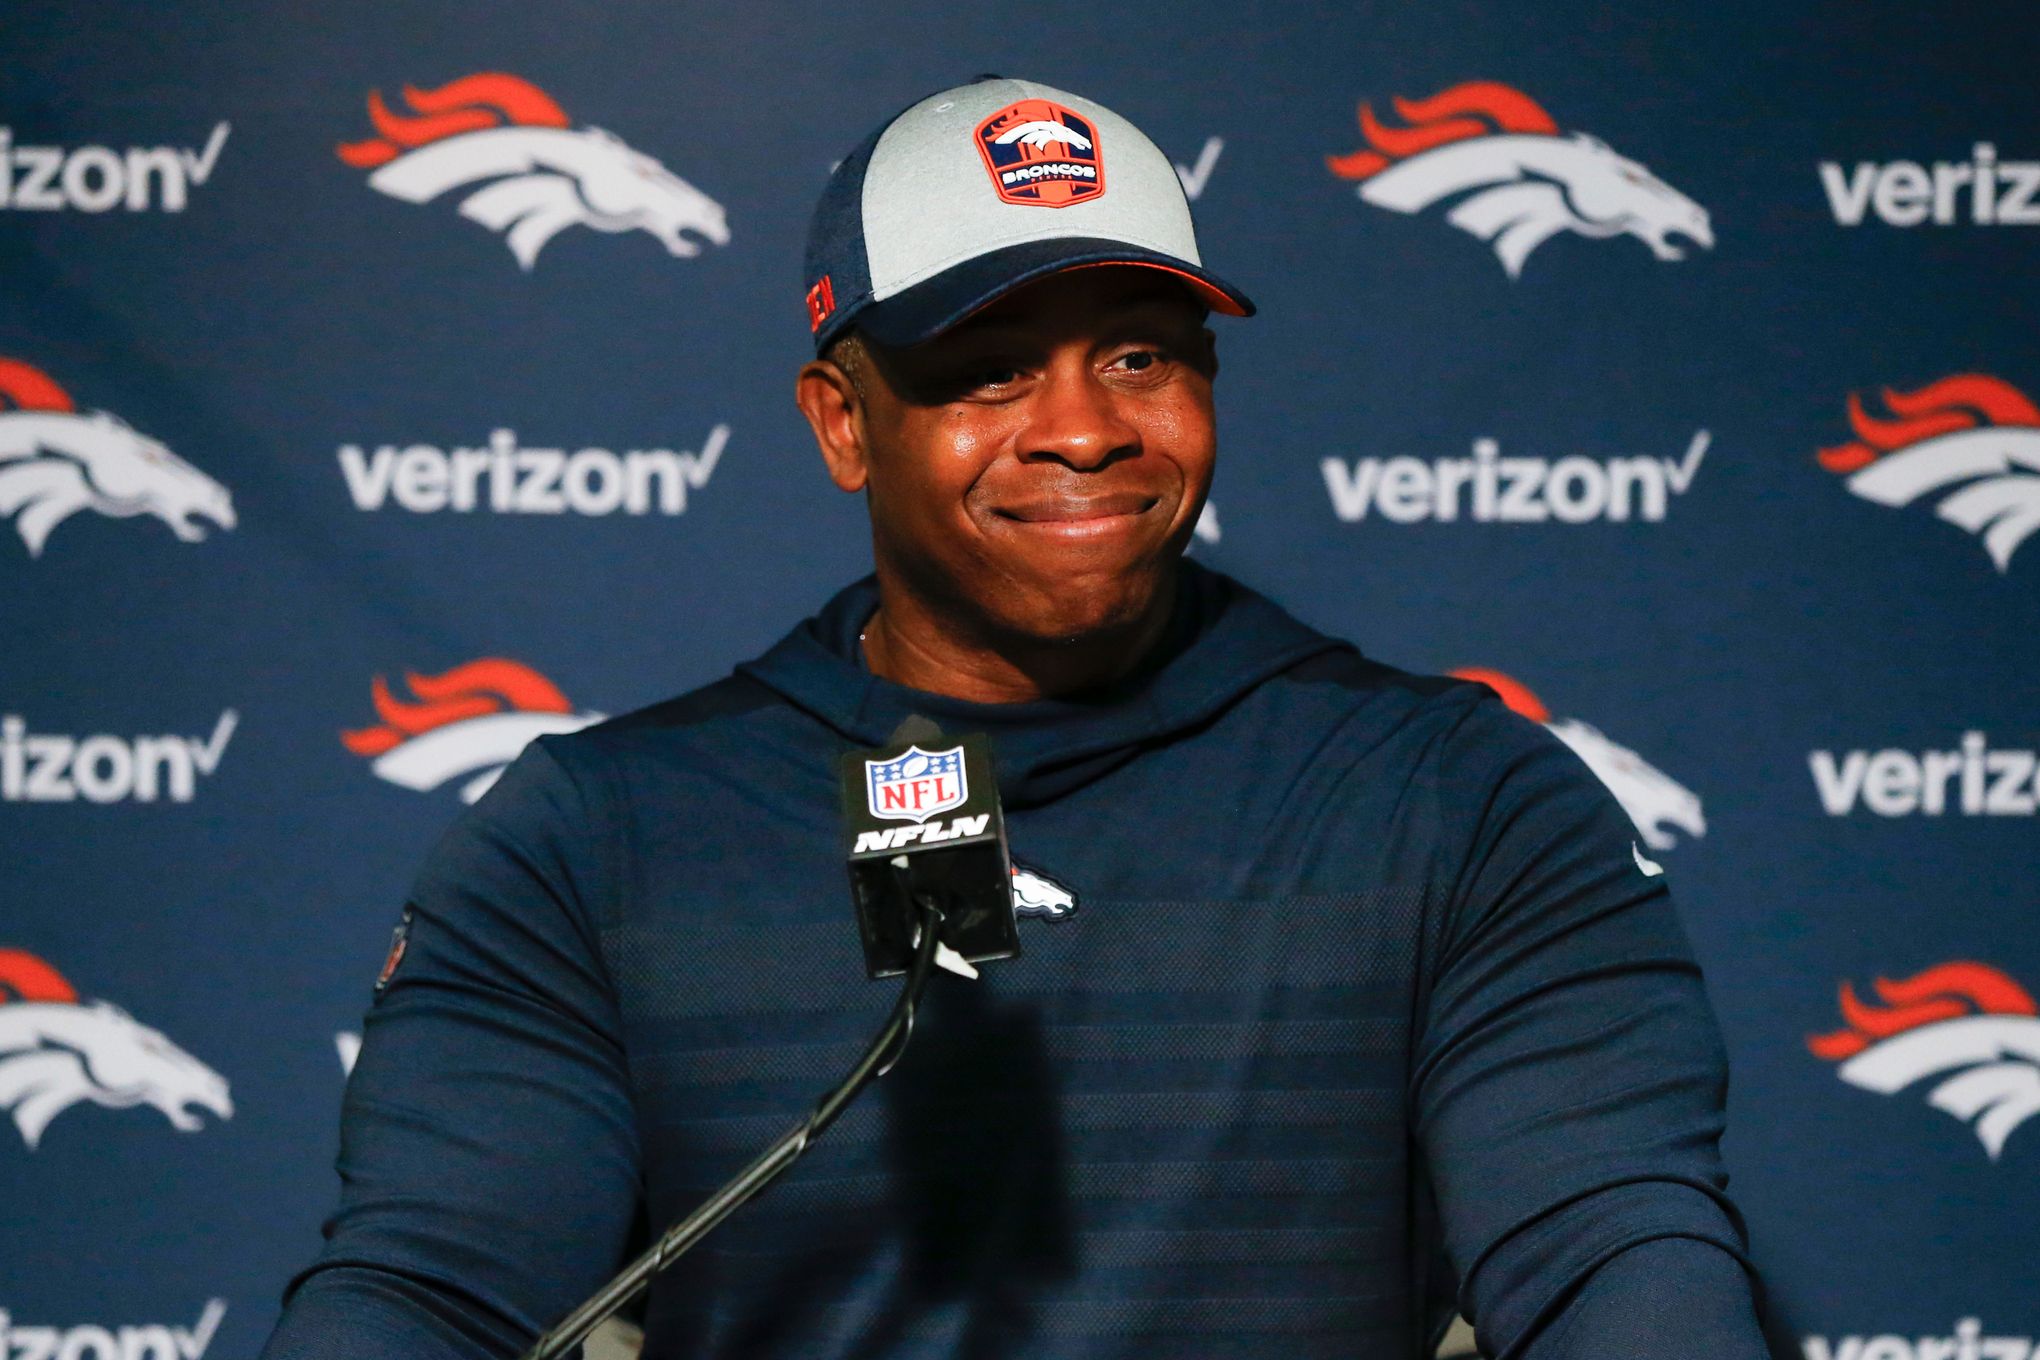 Broncos second-year coach Vance Joseph gets another shot